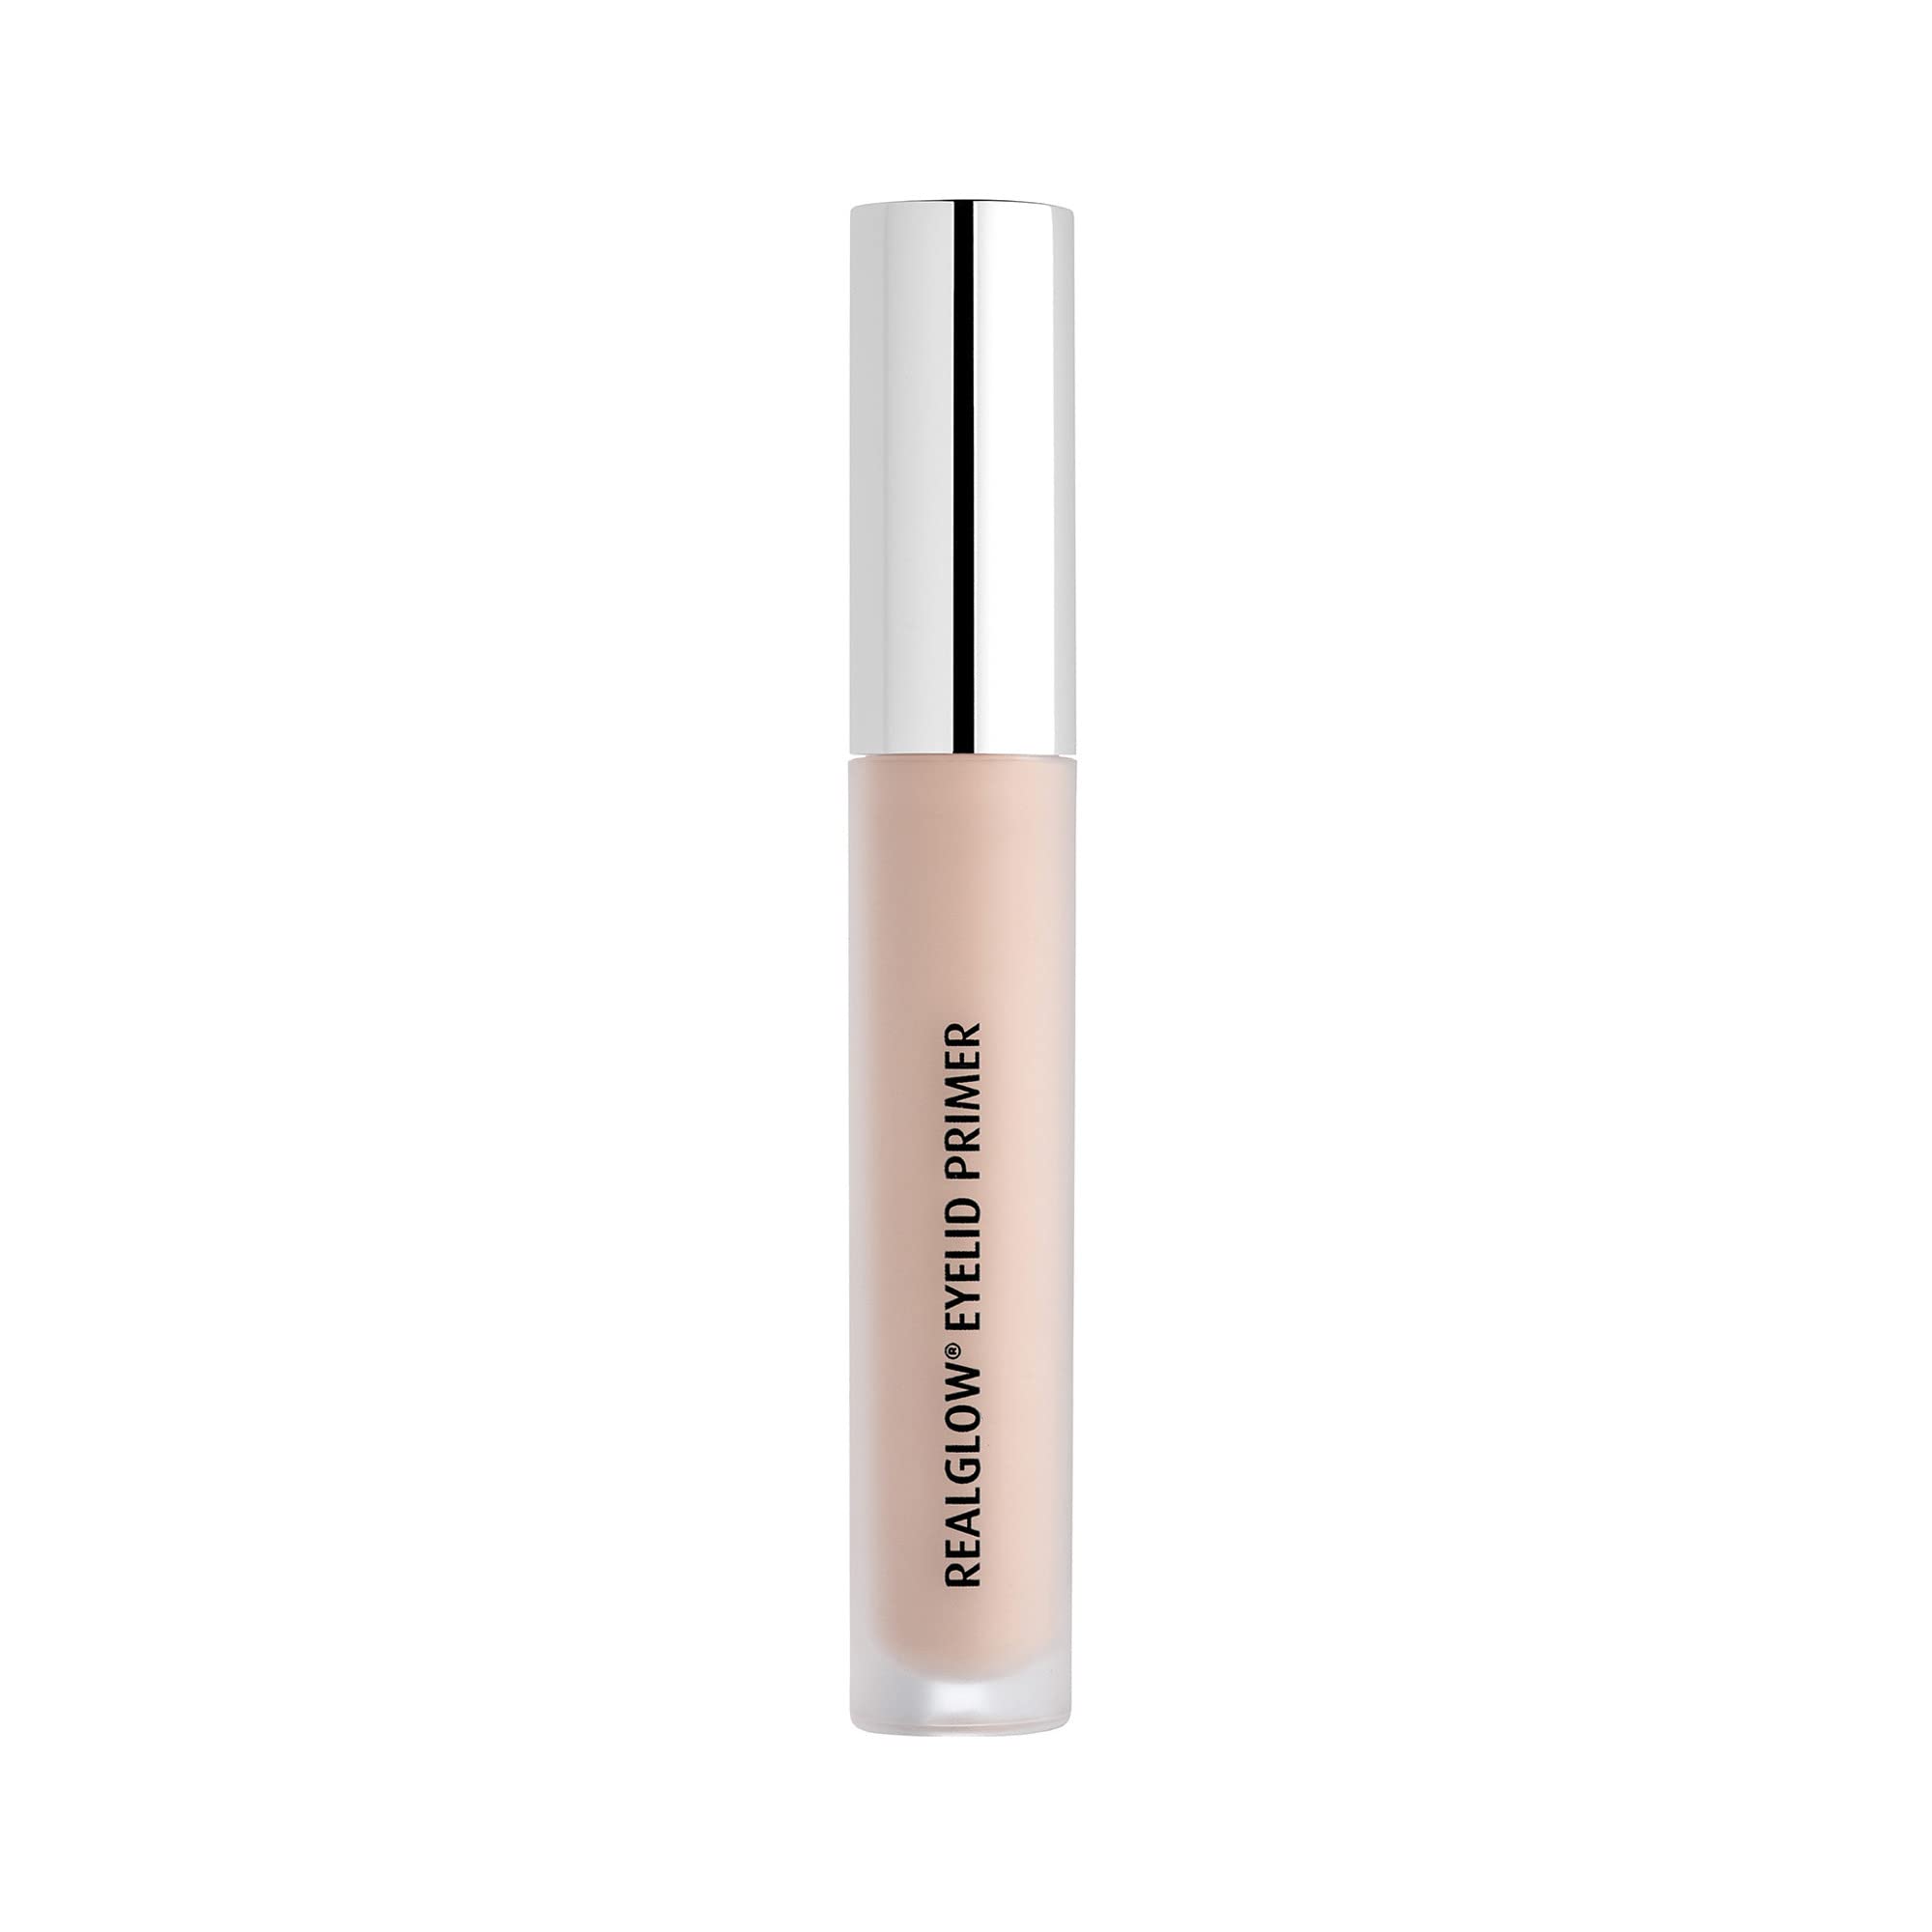 Lune+Aster RealGlow® Eyelid Primer - Hydrating, brightening and color correcting eyelid primer with vitamin E, licorice extract & apple seed extract